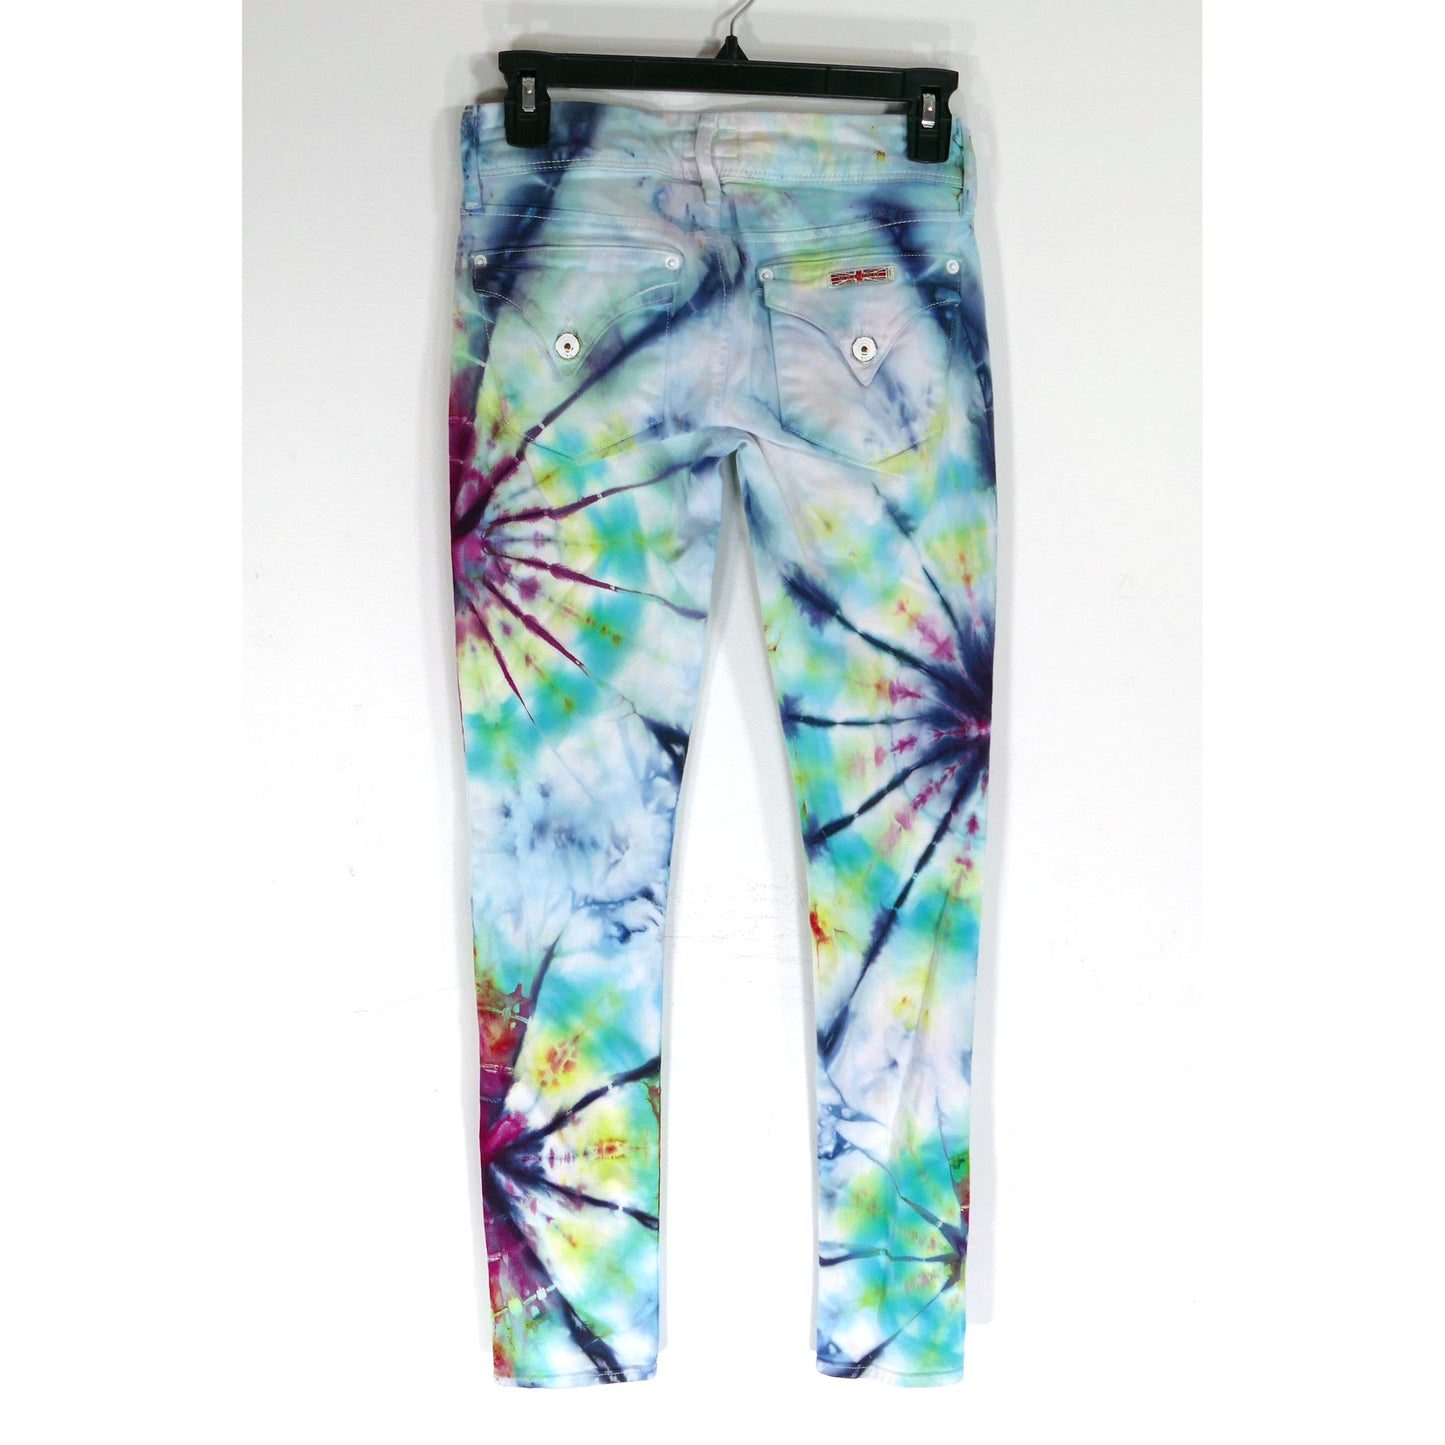 TIE-DYED HUDSON JEANS SIZE 0